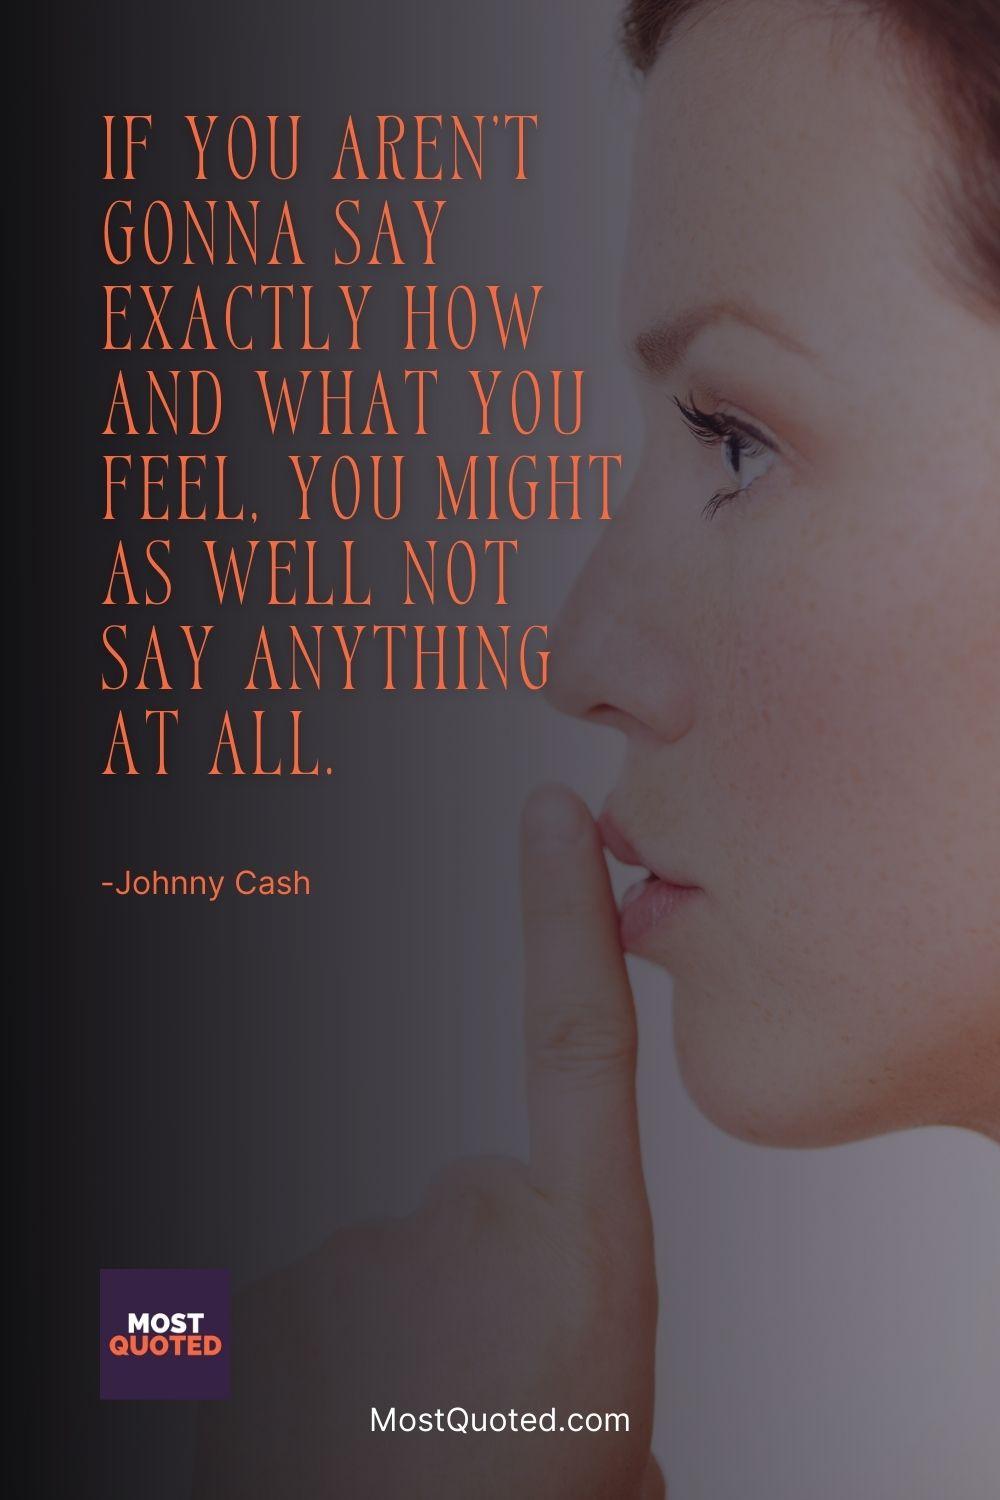 If you aren't gonna say exactly how and what you feel, you might as well not say anything at all. - Johnny Cash